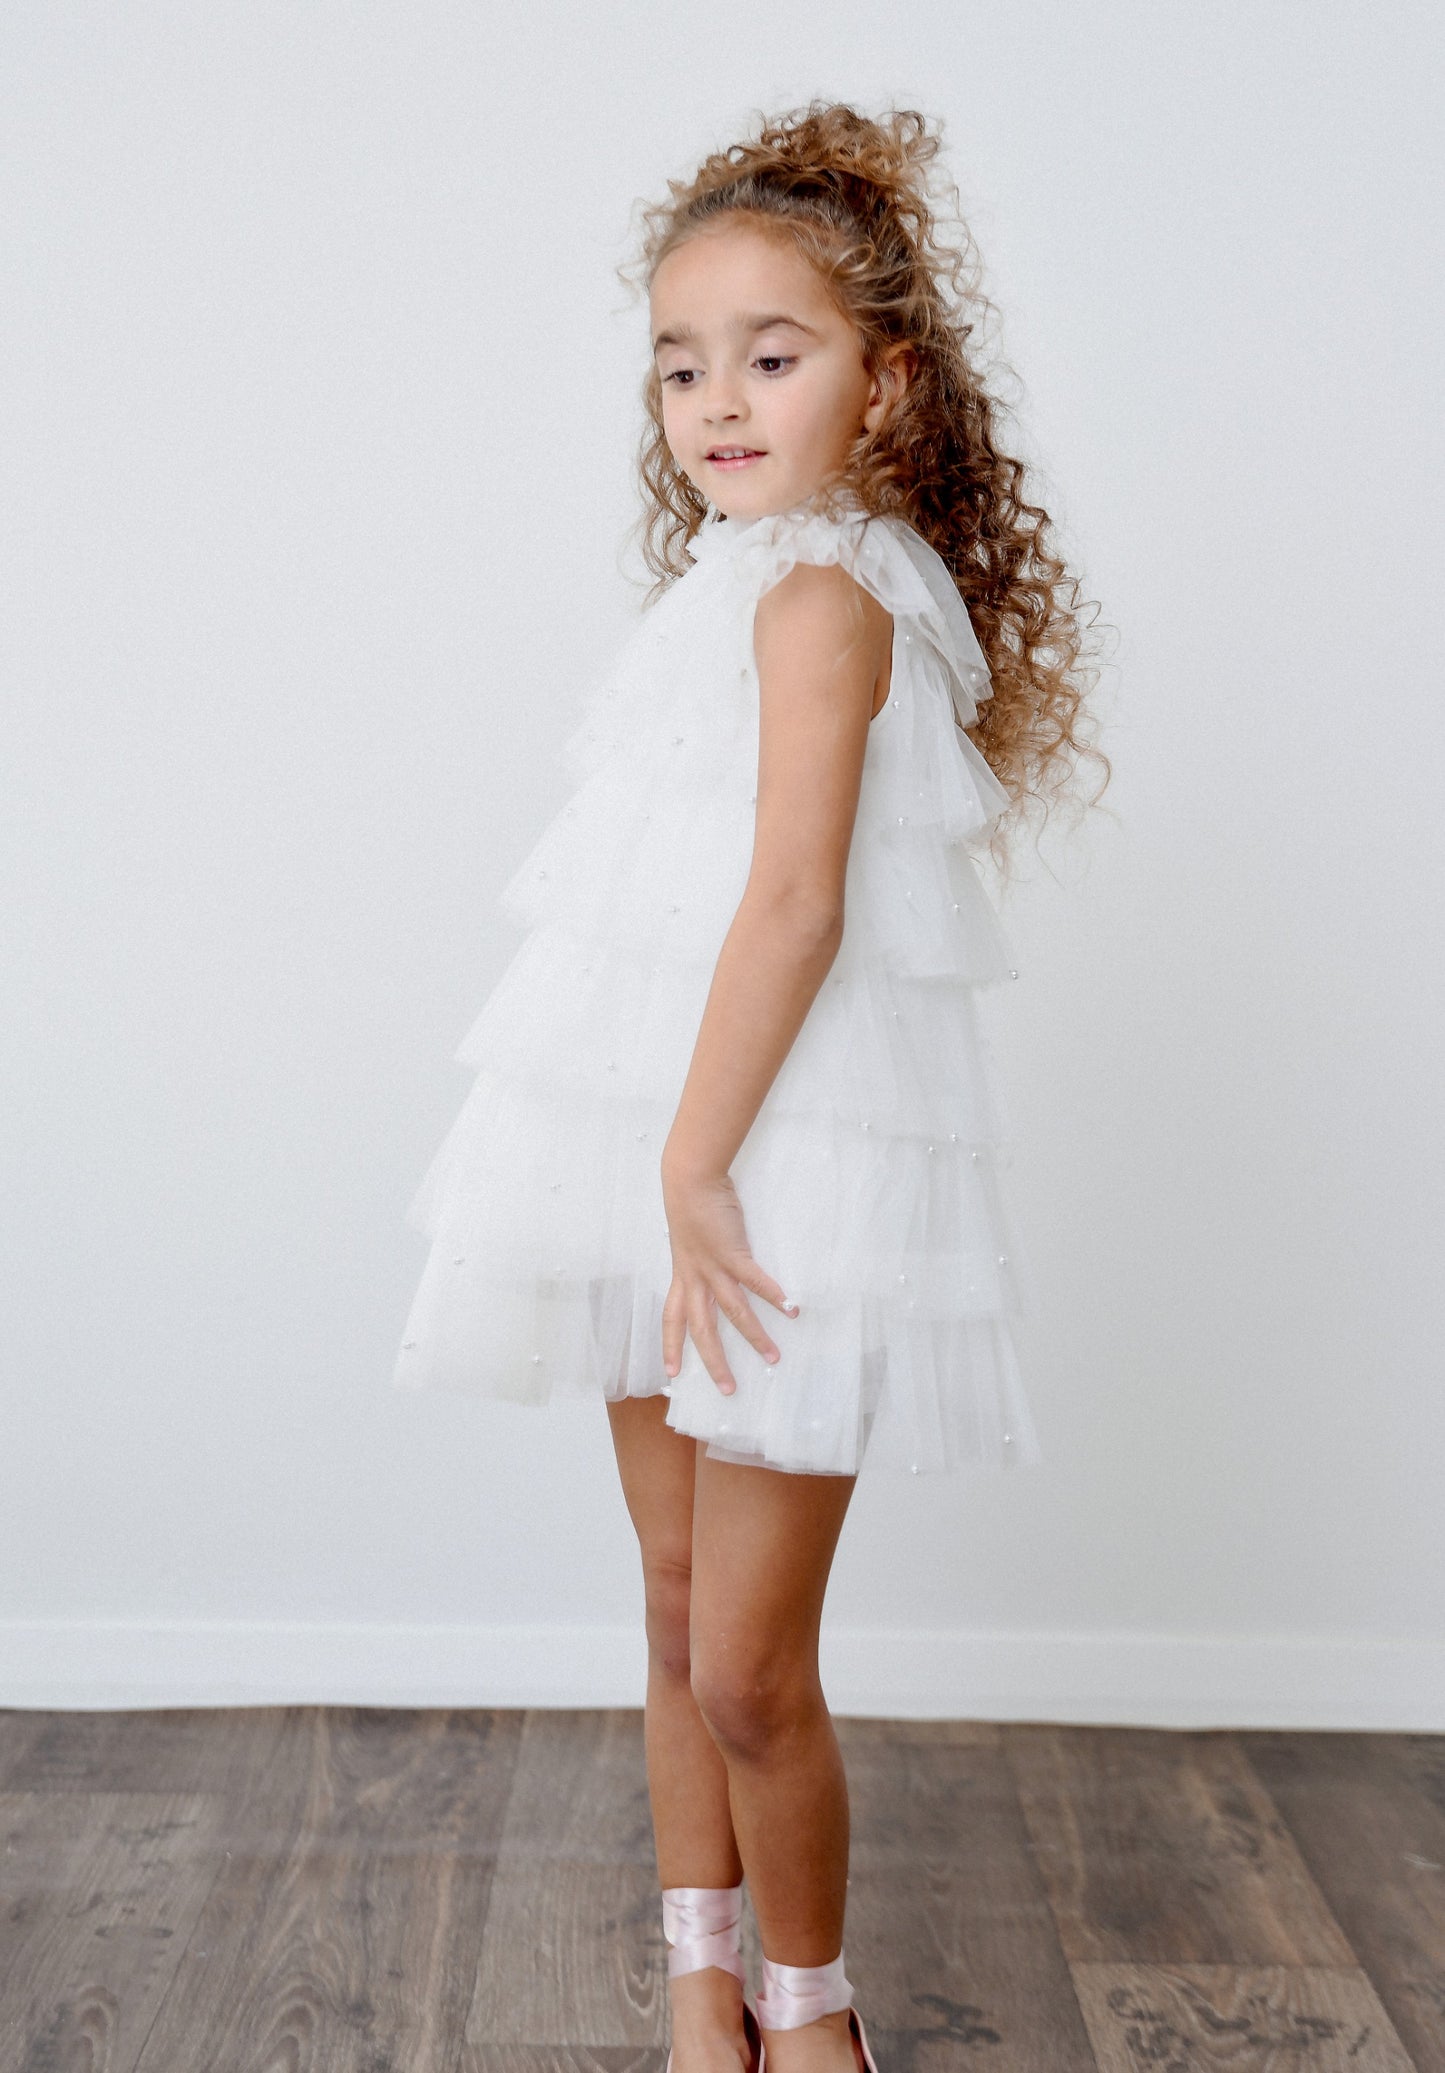 DOLLY® PEARL TUTULLY TIERED TULLE TUTU DRESS white  ⚪